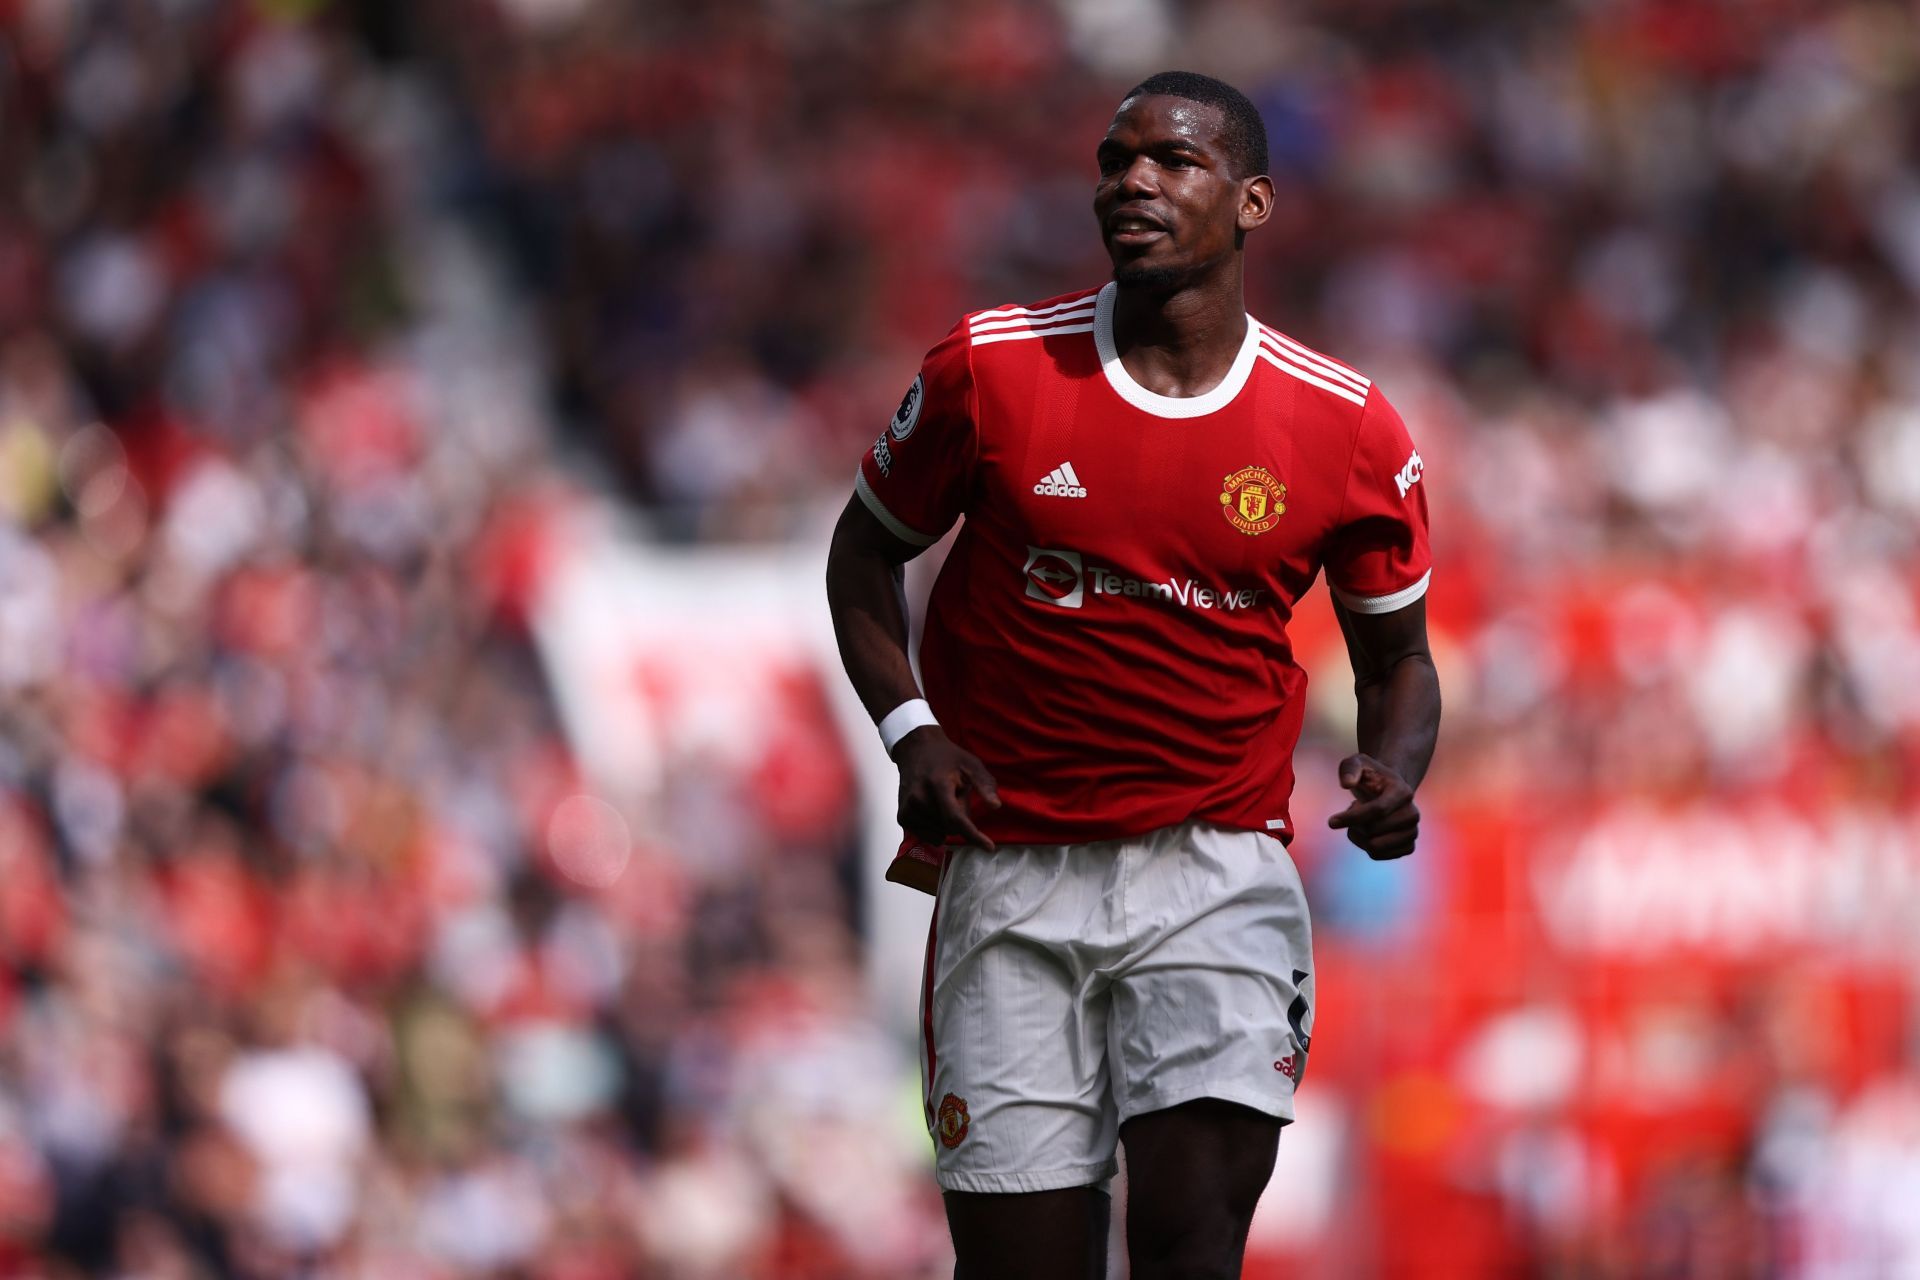 Paul Pogba will leave Manchester United this summer.